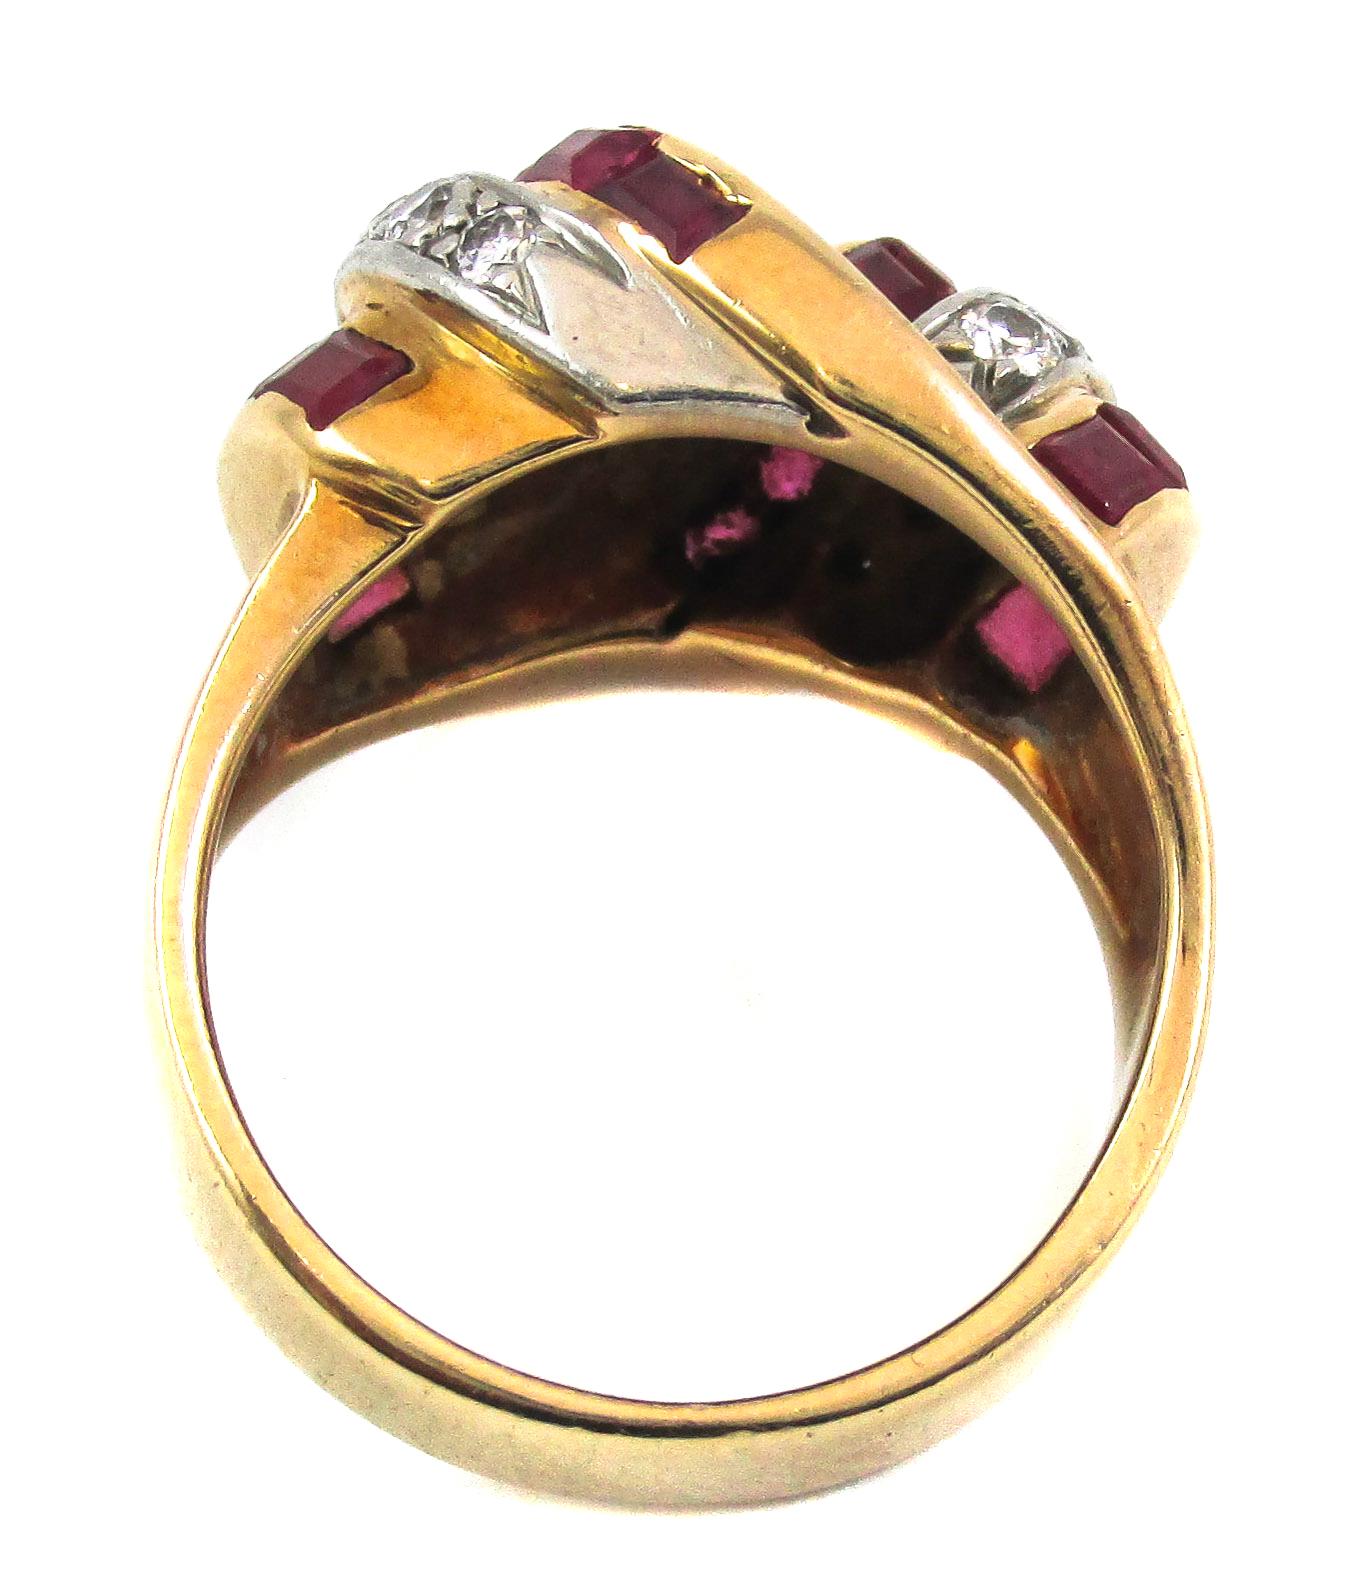 Classic Retro ring from ca. 1940 with an enchanting design of channel set Burma rubies and Old European cut diamonds. The curved design and alternating bands of red and white give this ring its unique and three dimensional look. A bold and fun